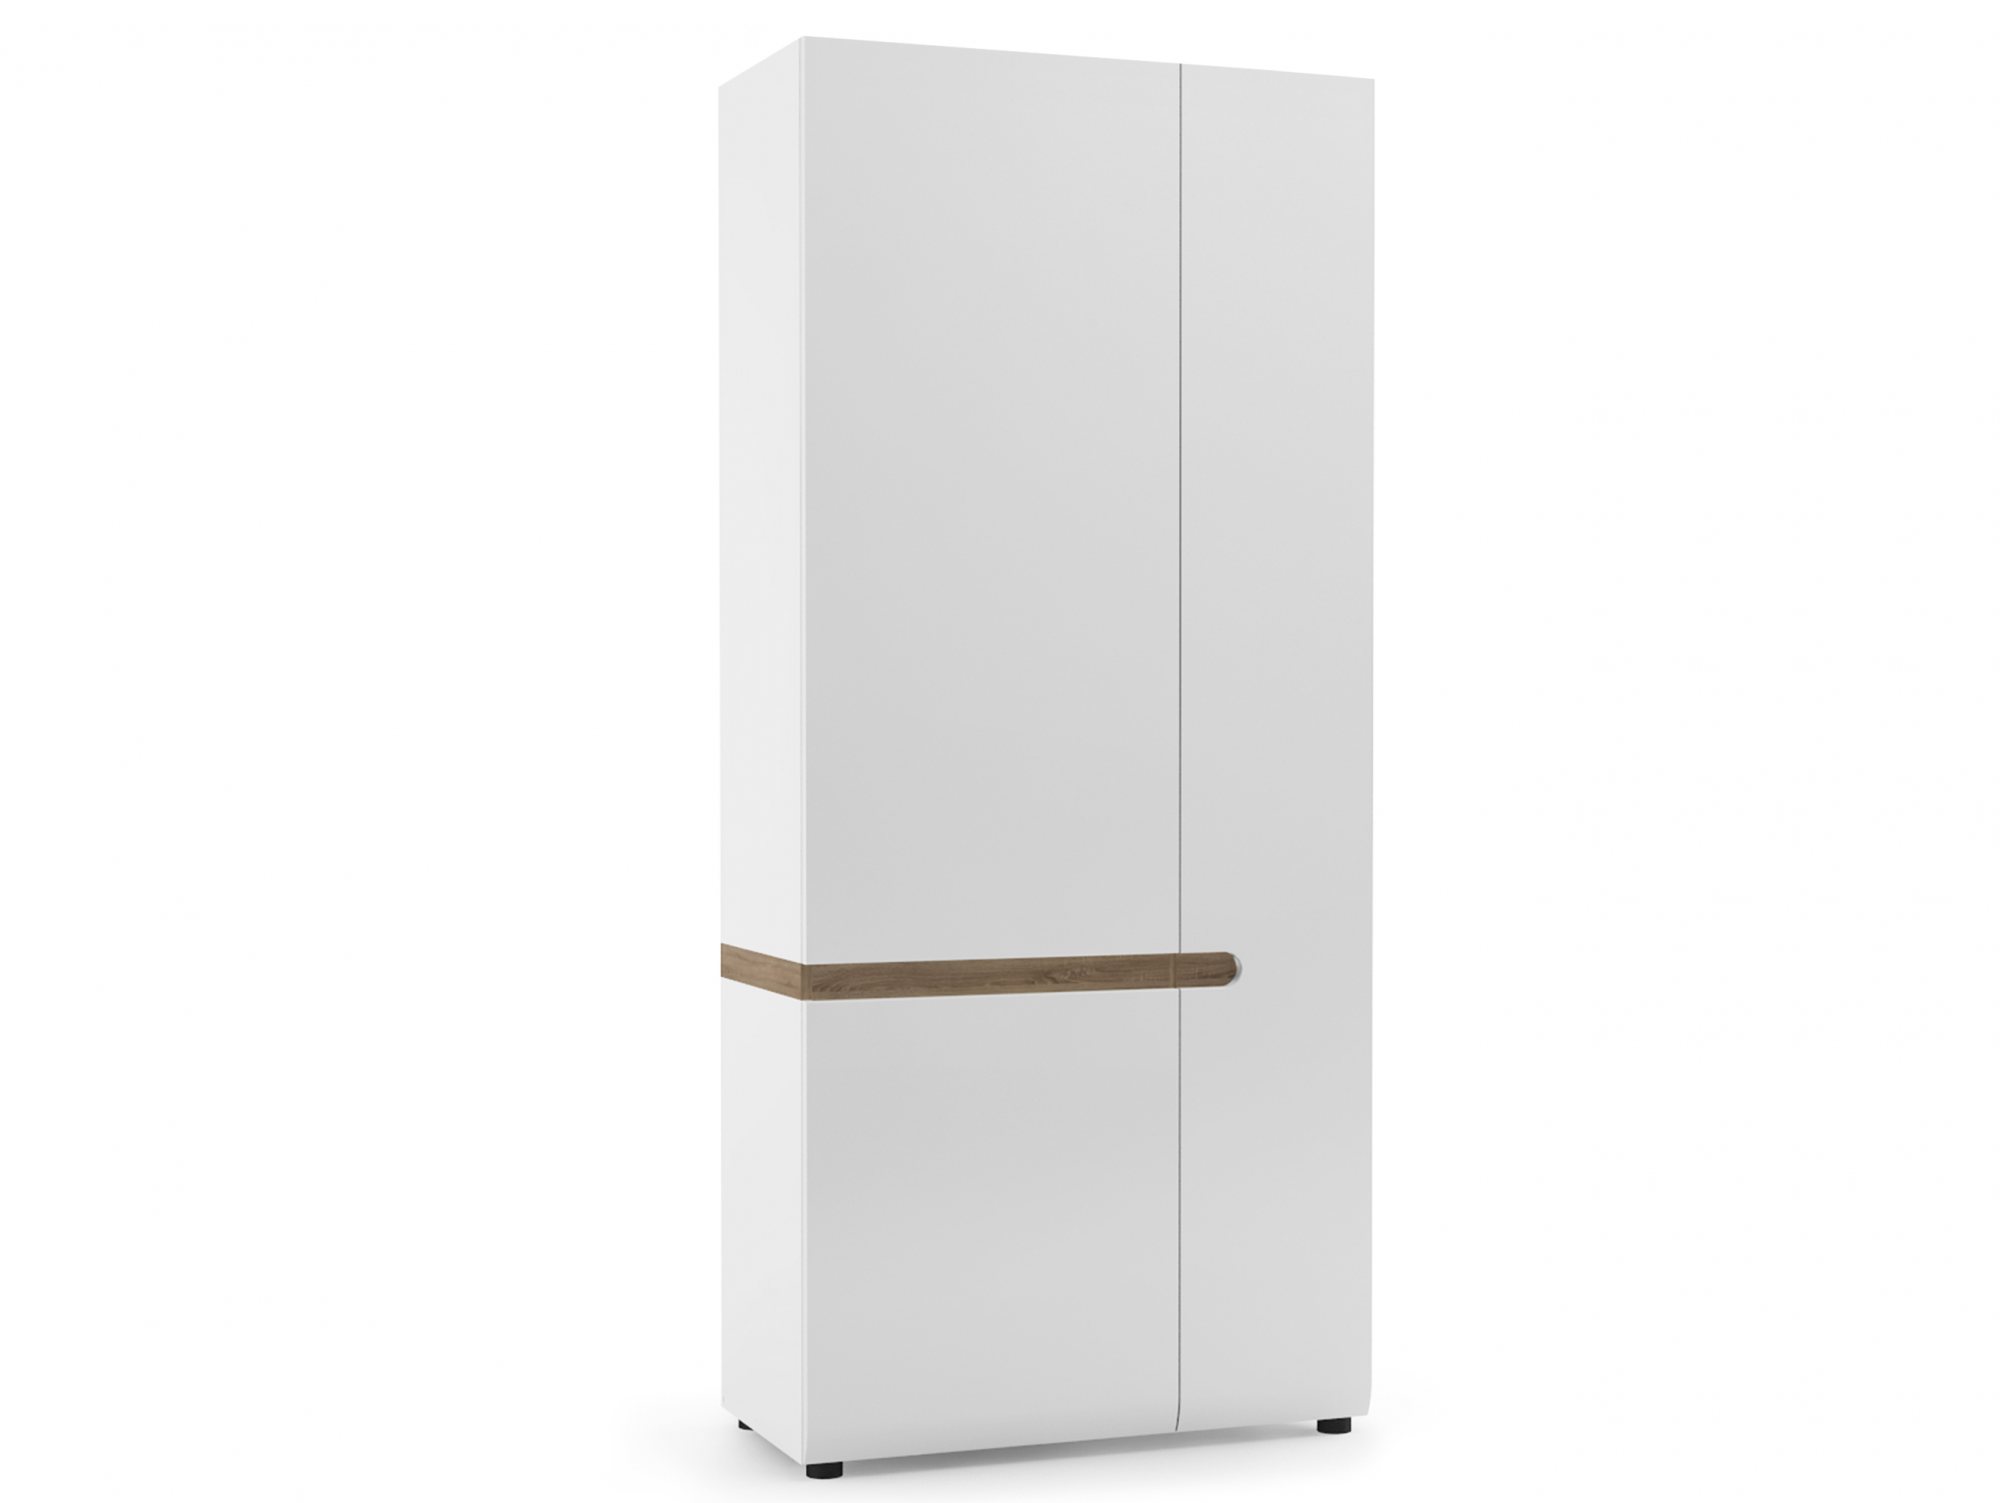 Furniture To Go Furniture To Go Chelsea White High Gloss and Truffle Oak 2 Door Double Wardrobe (Flat Packed)